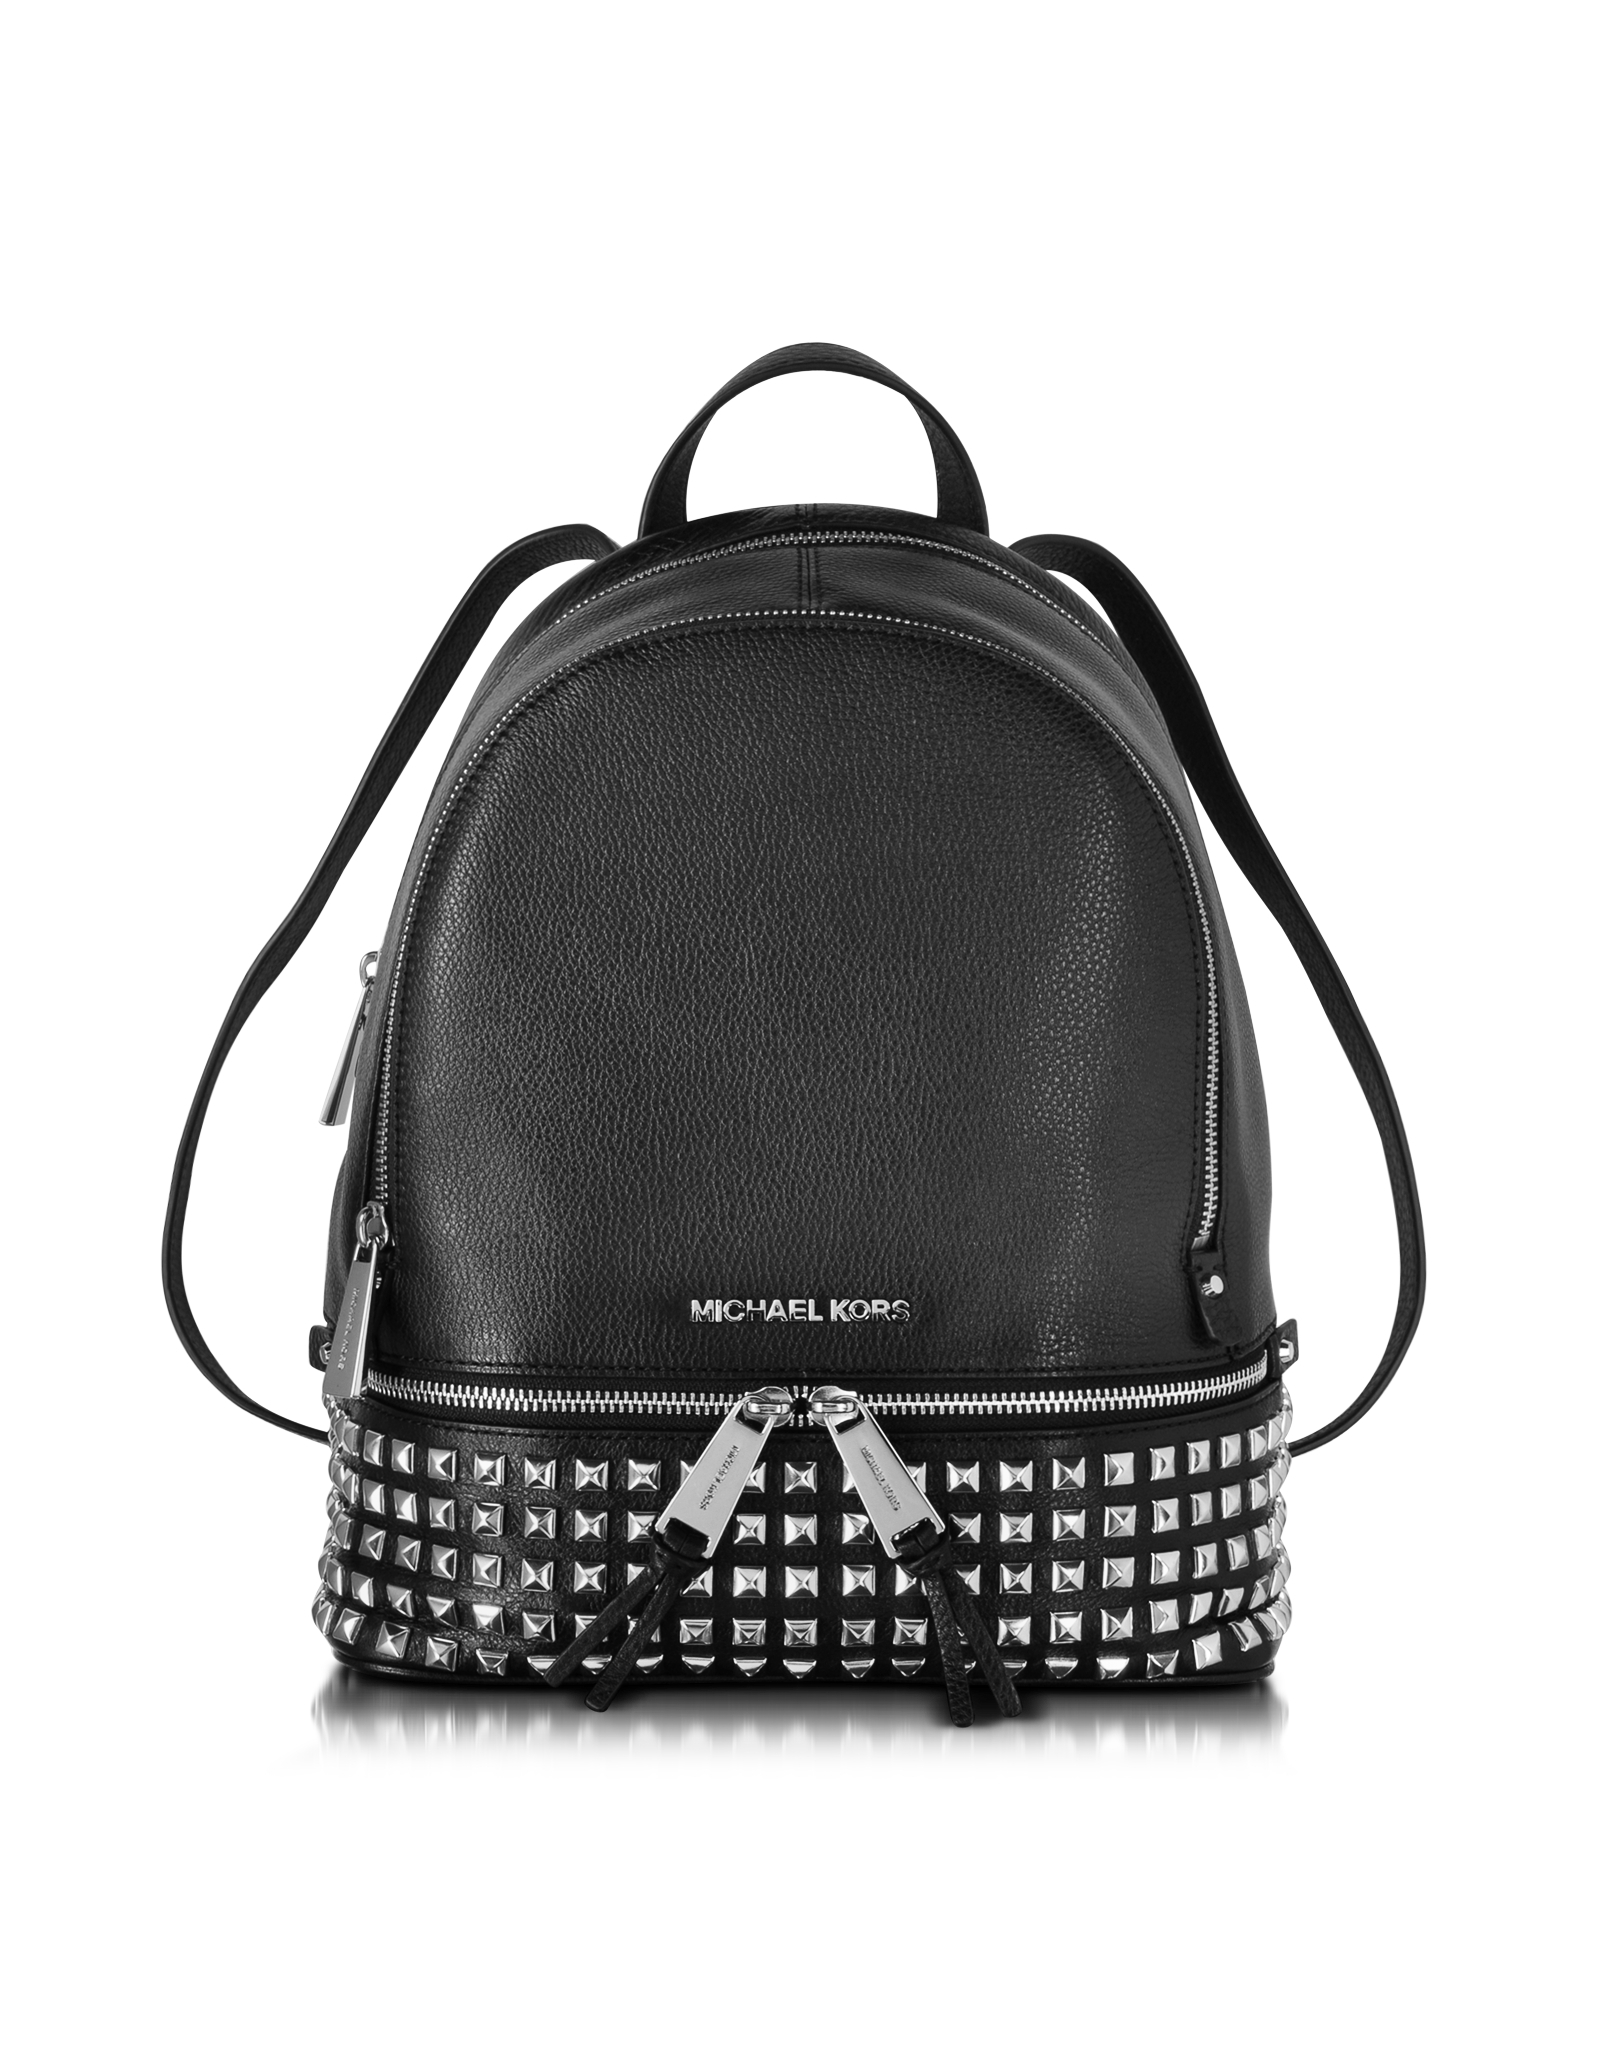 Michael kors Rhea Zip Small Studded Leather Backpack in Black | Lyst